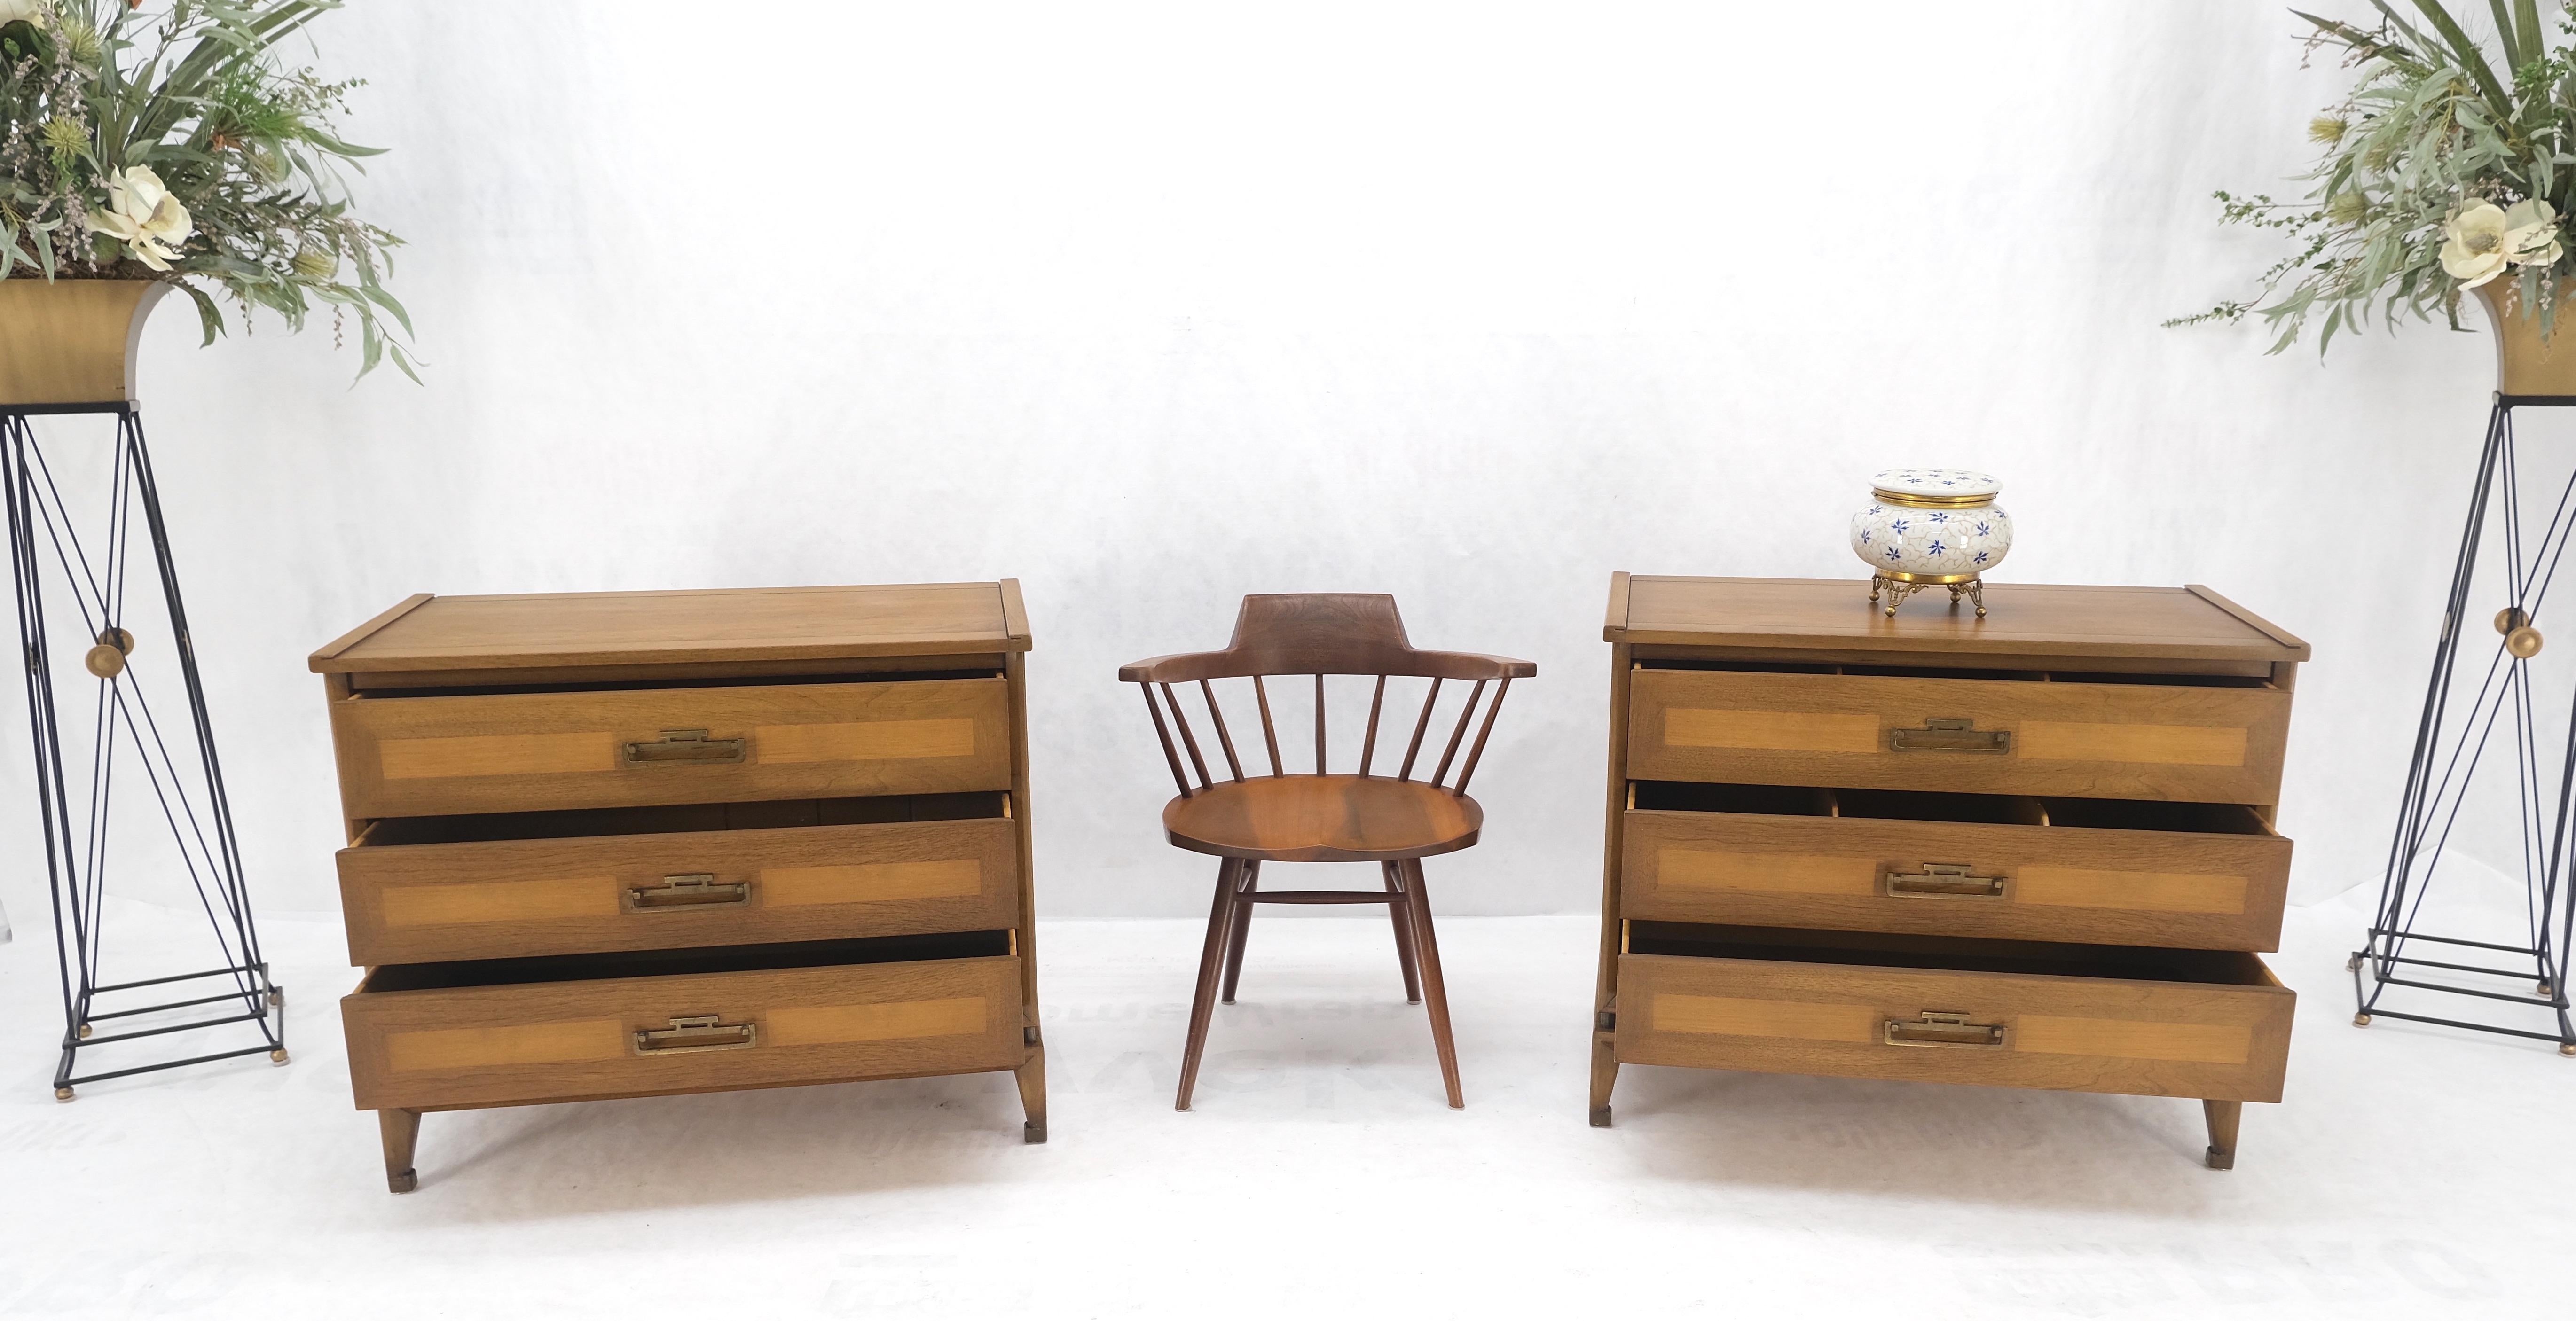 Pair Three Drawers Light Walnut Banded Drawers Drop Pulls Bachelor Chests MINT! For Sale 2